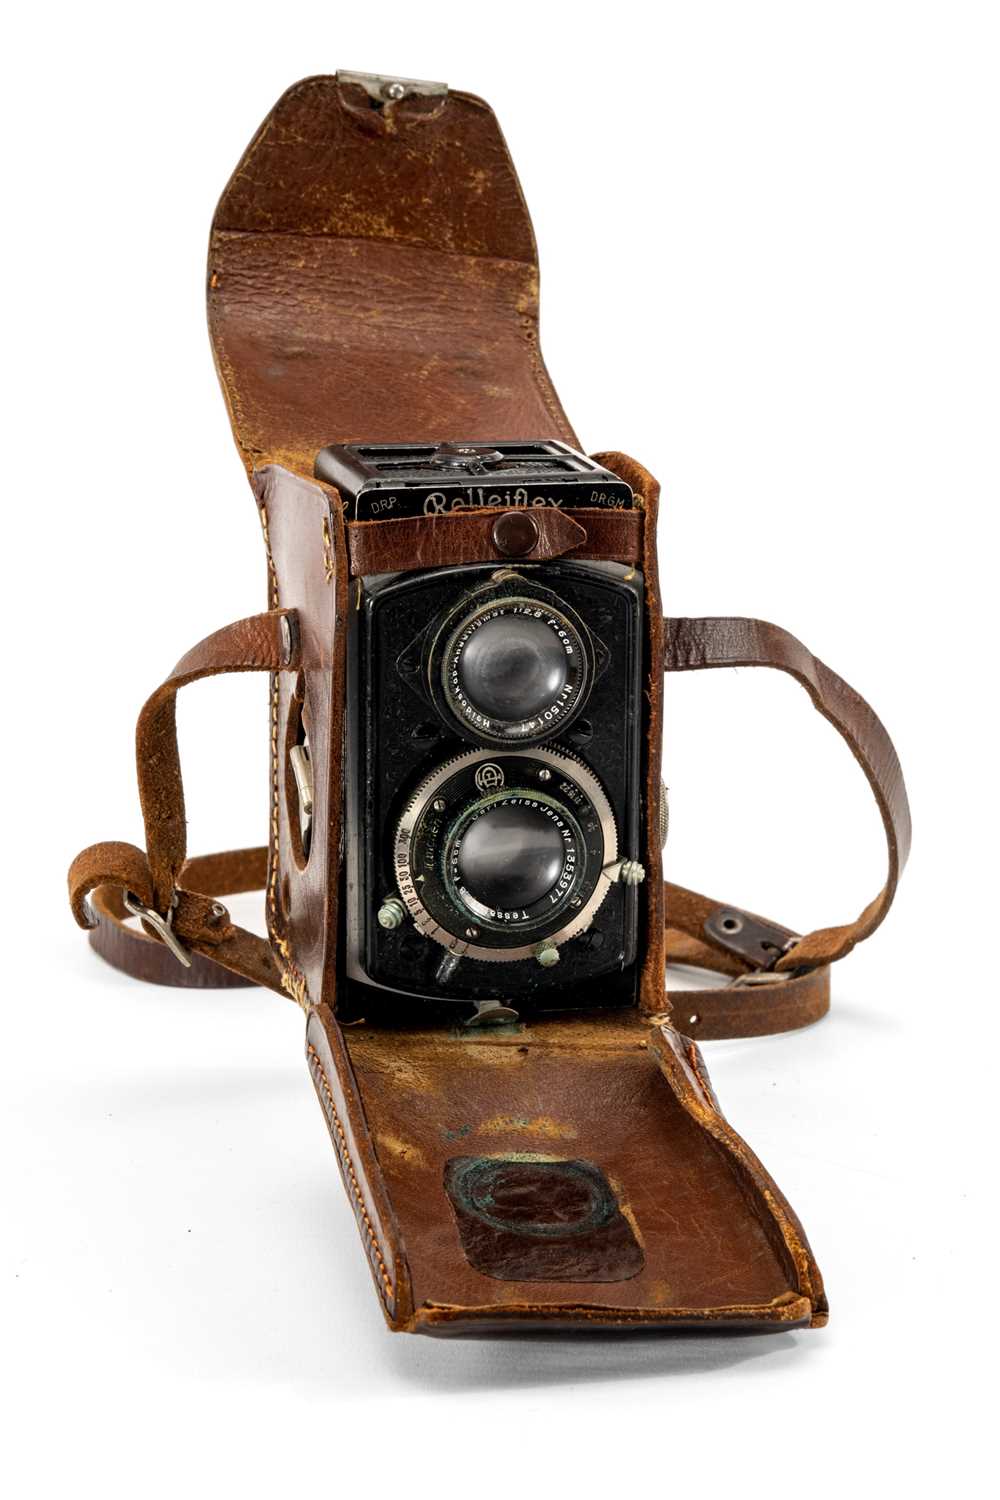 A BABY ROLLEIFLEX 2.8F TLR CAMERA - black, serial no. 152736, with a Carl Zeiss Jena Tessar f/2.8